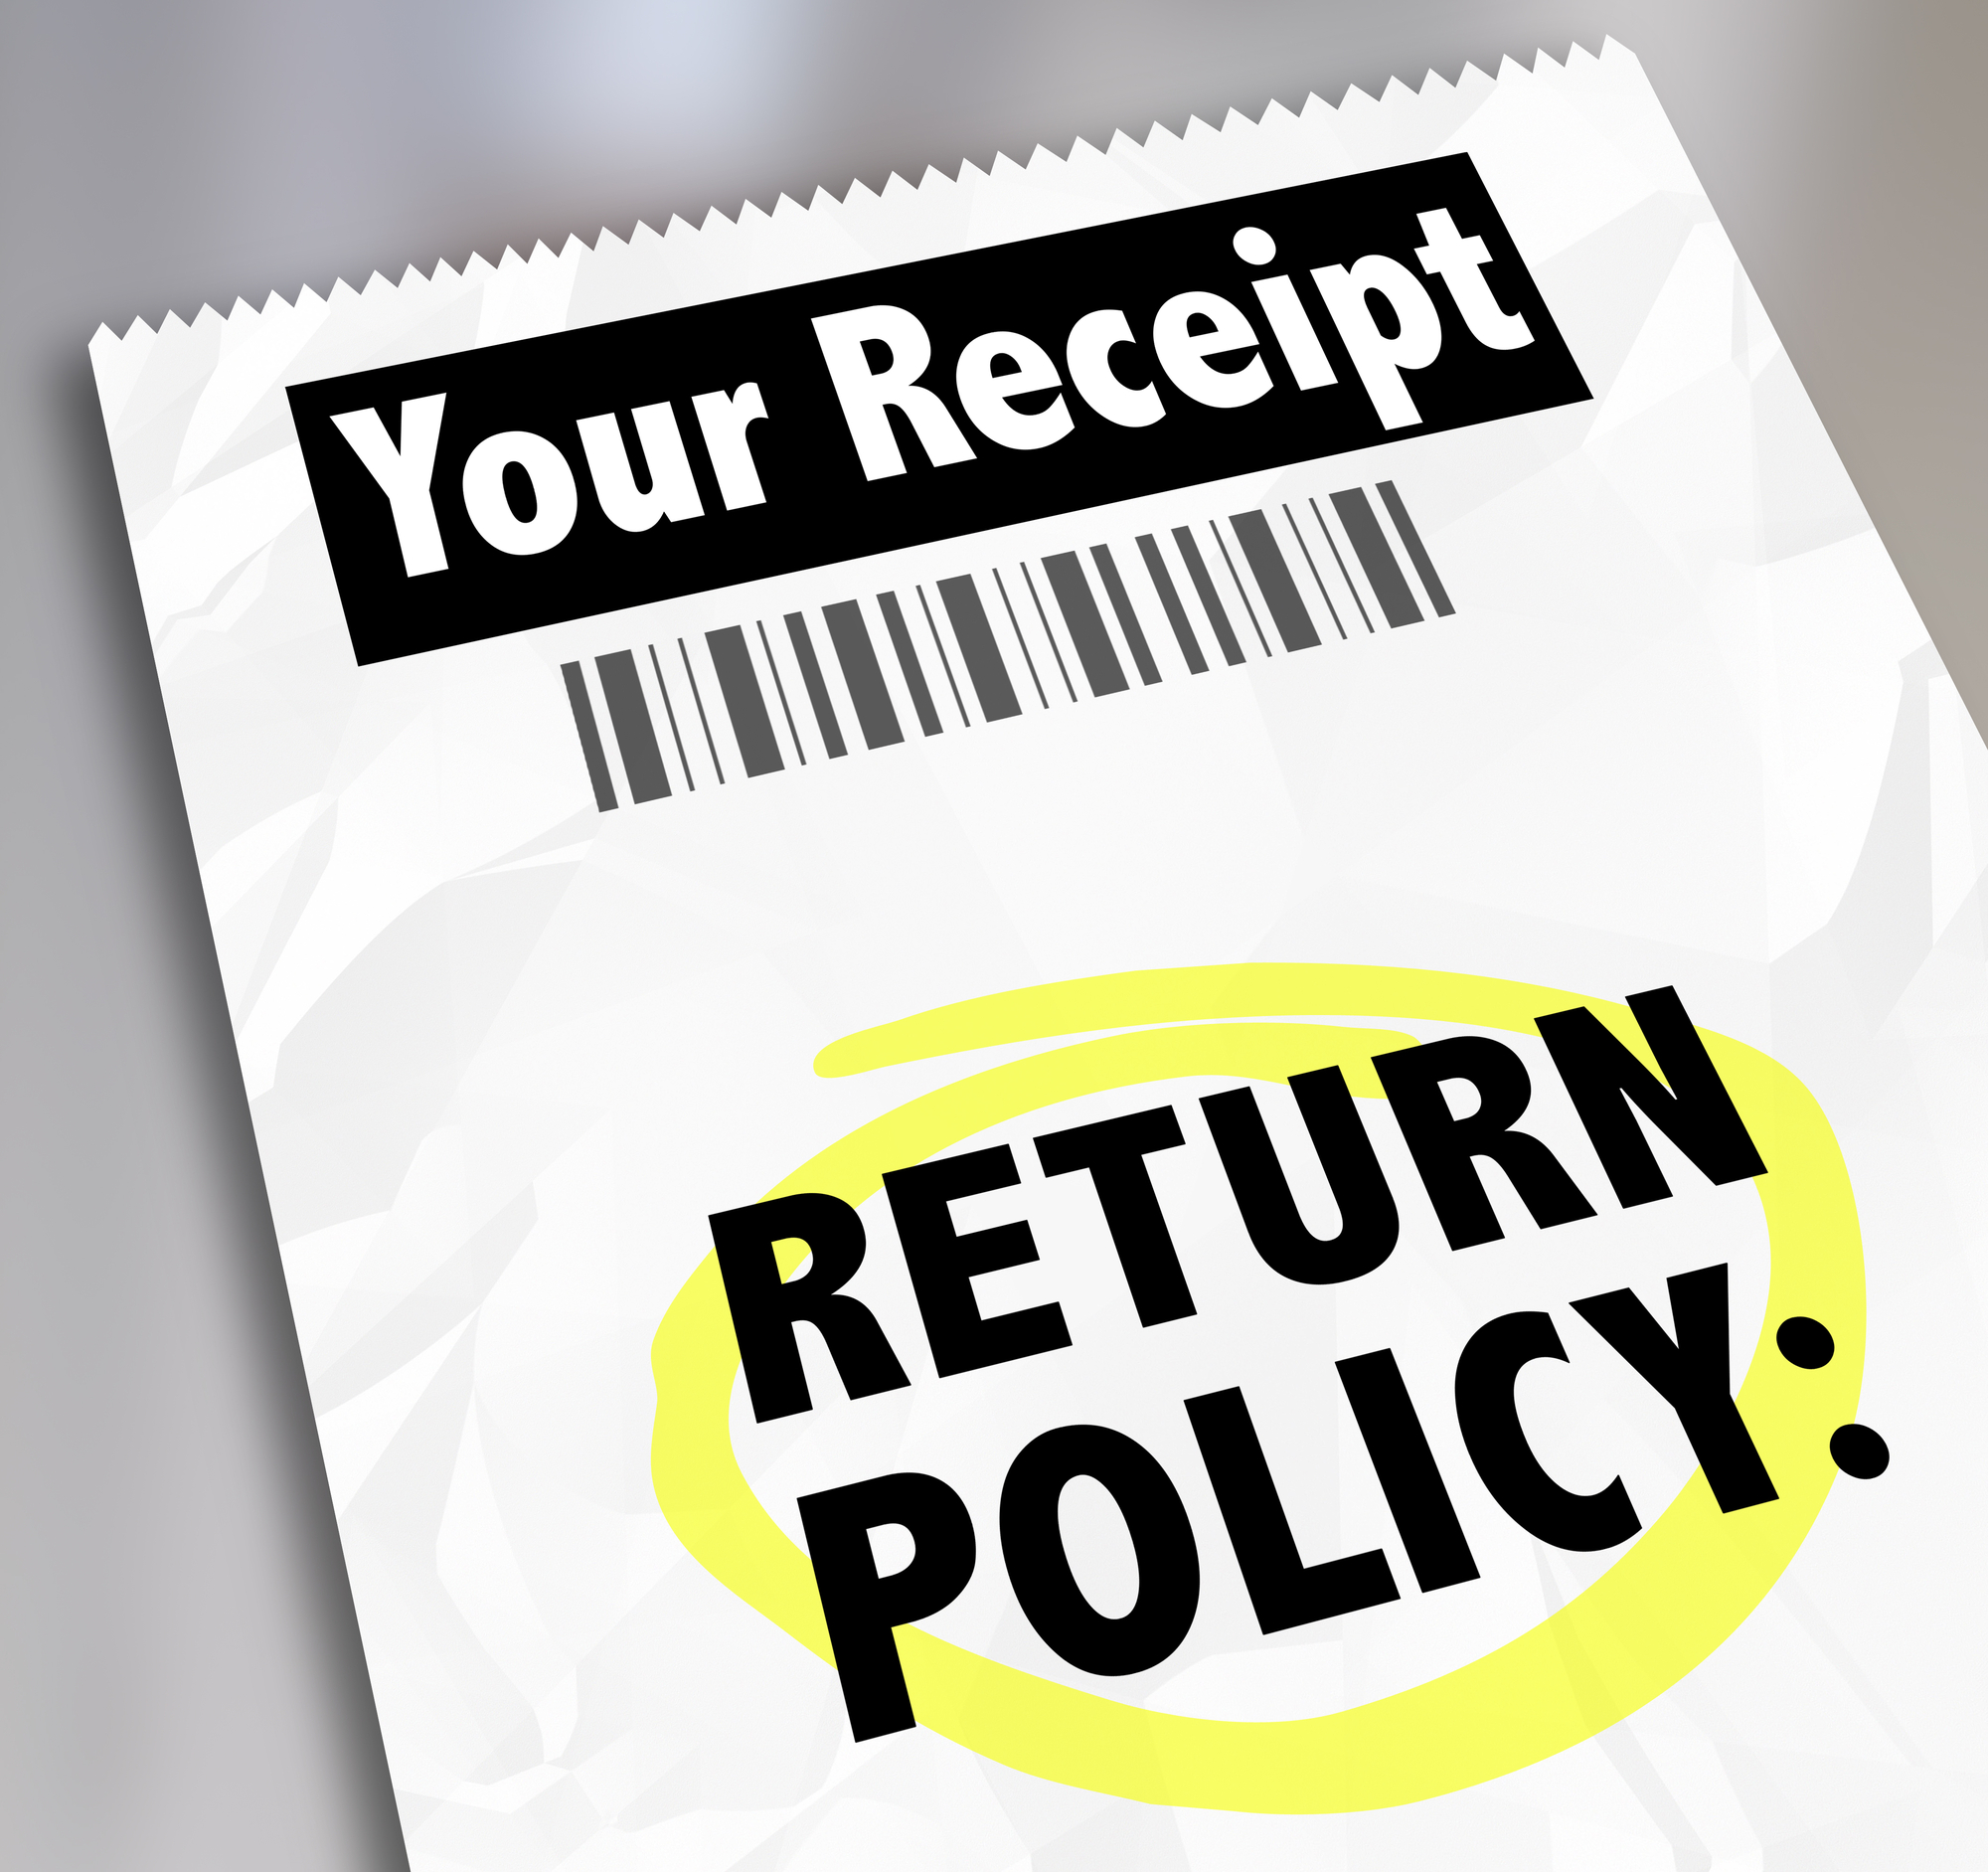 Return Policy words on a store receipt or proof of purchase to tell you how to exchange goods, products or services you no longer want